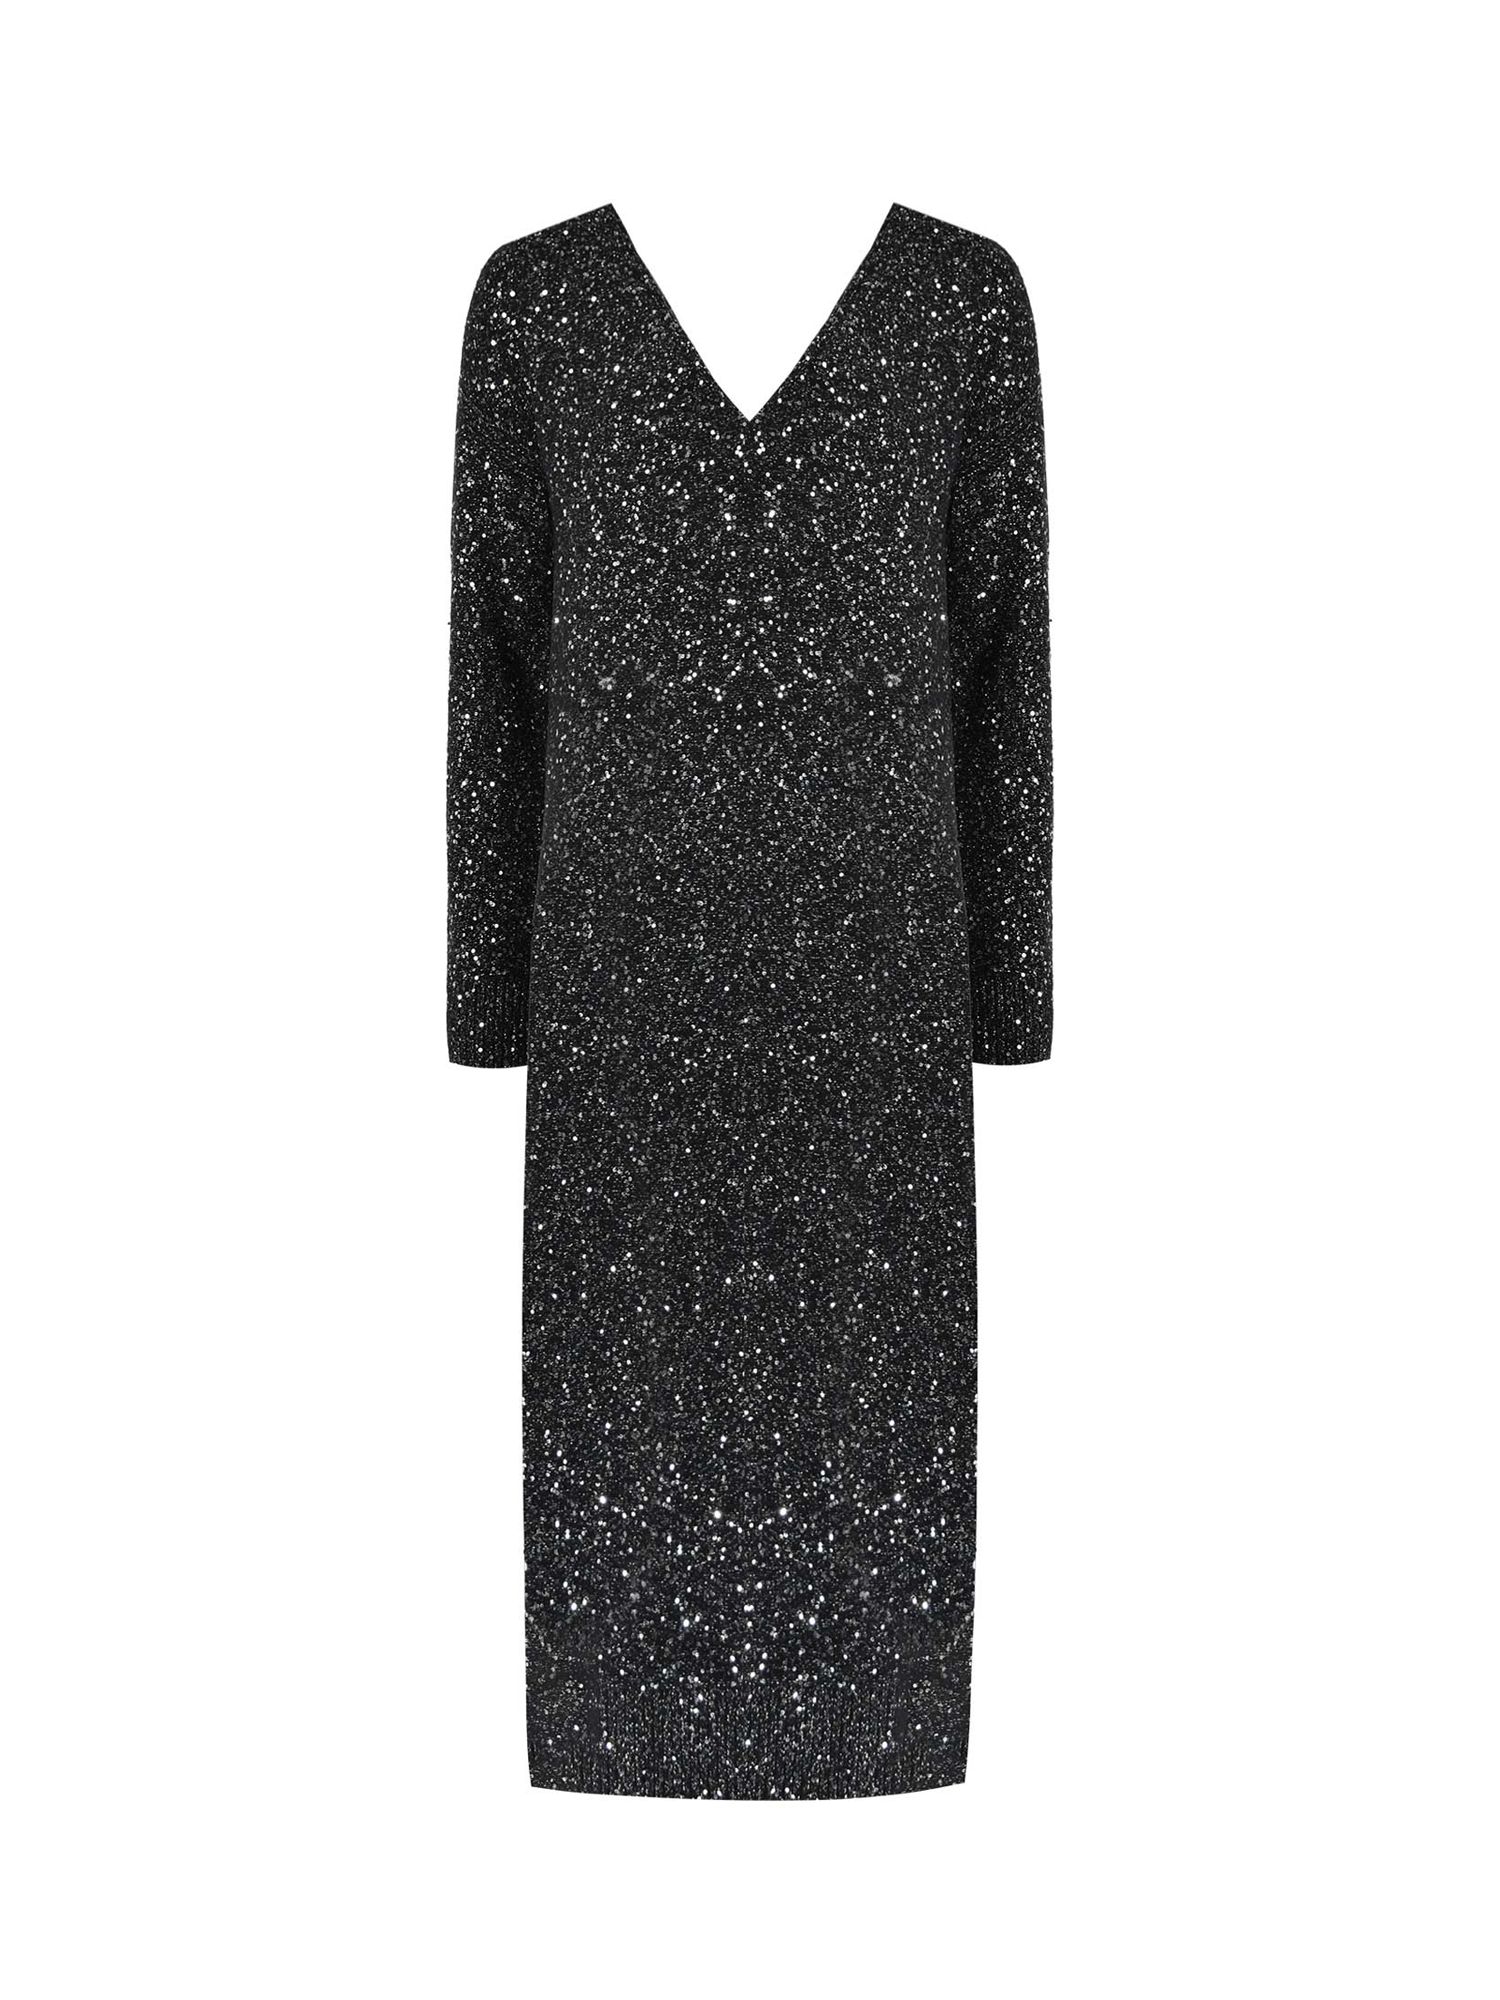 Ro&Zo Sparkle Sequin V Neck Knitted Dress, Grey at John Lewis & Partners